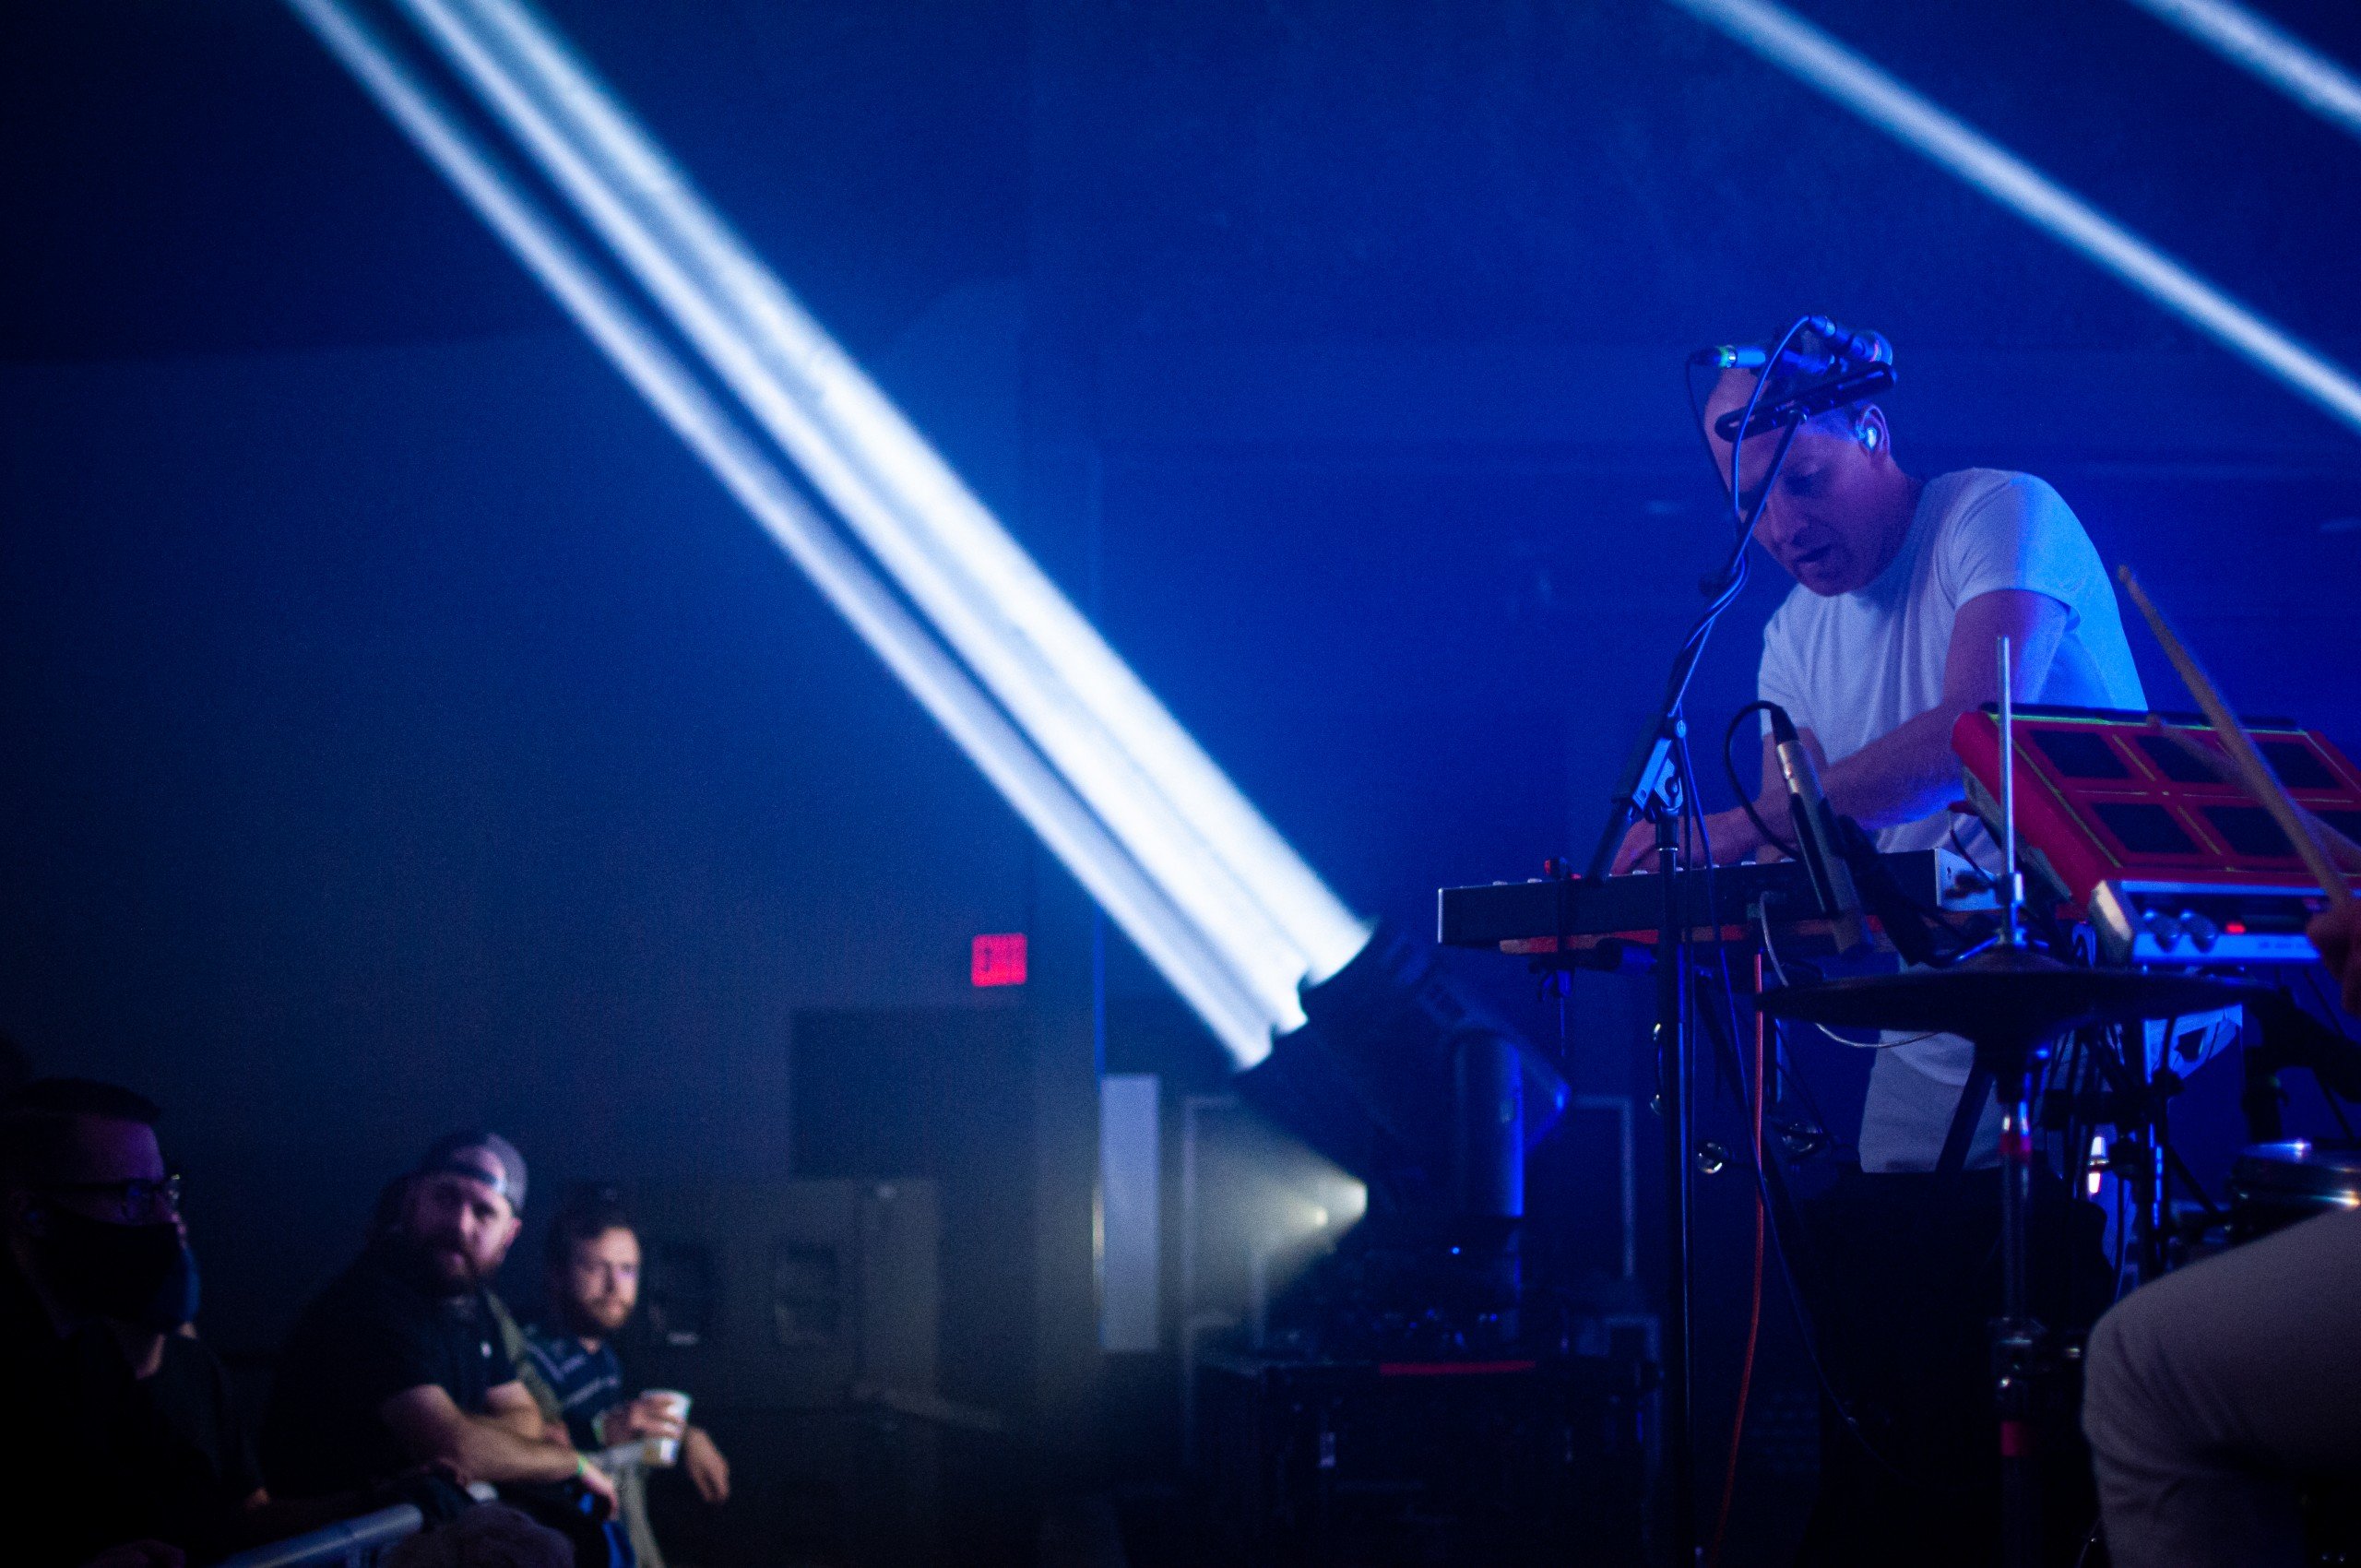 Photos: Caribou’s entrancing dance grooves at the Granada